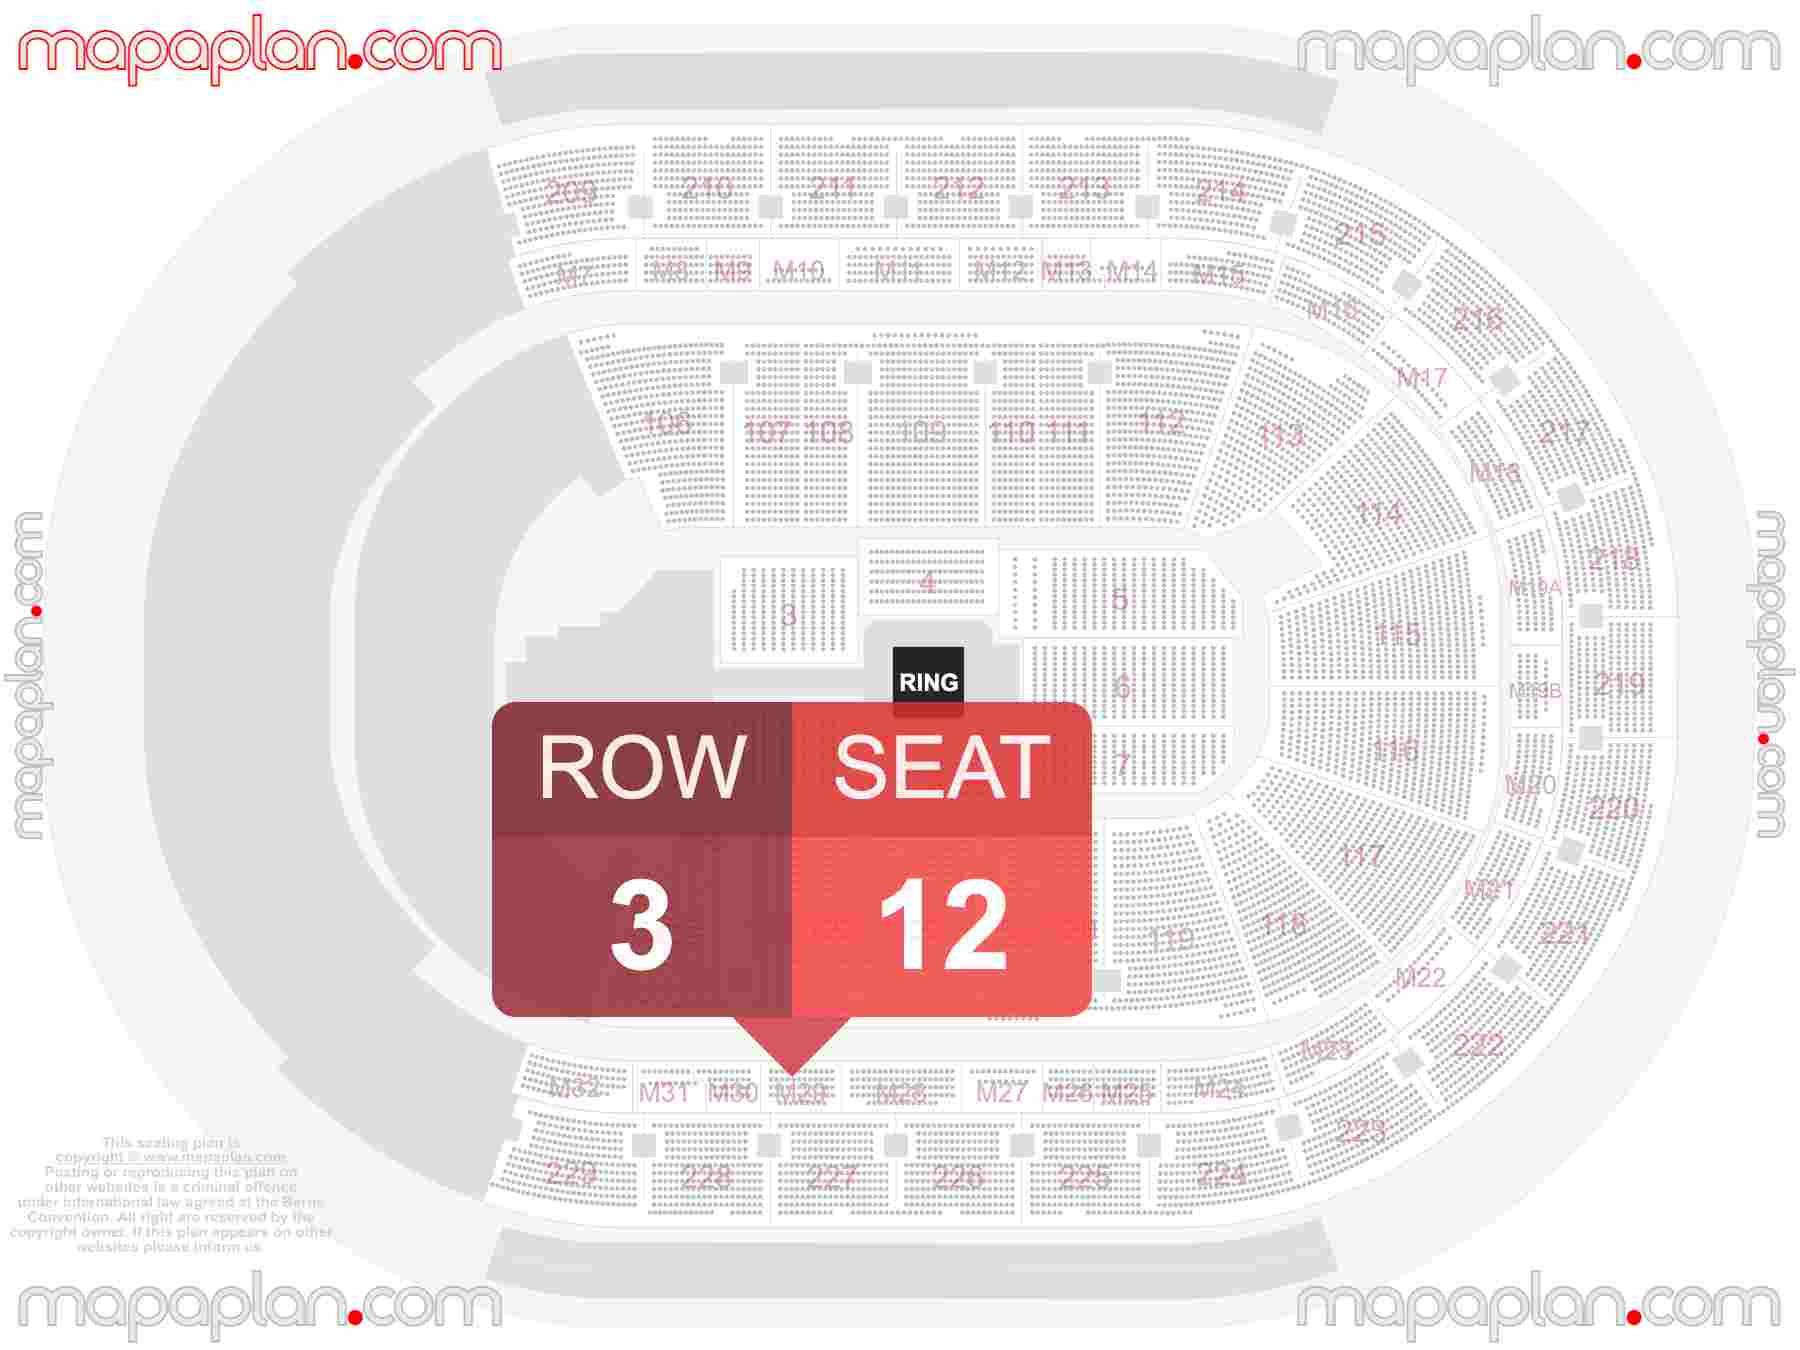 Detroit Little Caesars Arena seating chart WWE wrestling & boxing interactive seating checker map plan showing seat numbers per row - Ticket prices sections review diagram